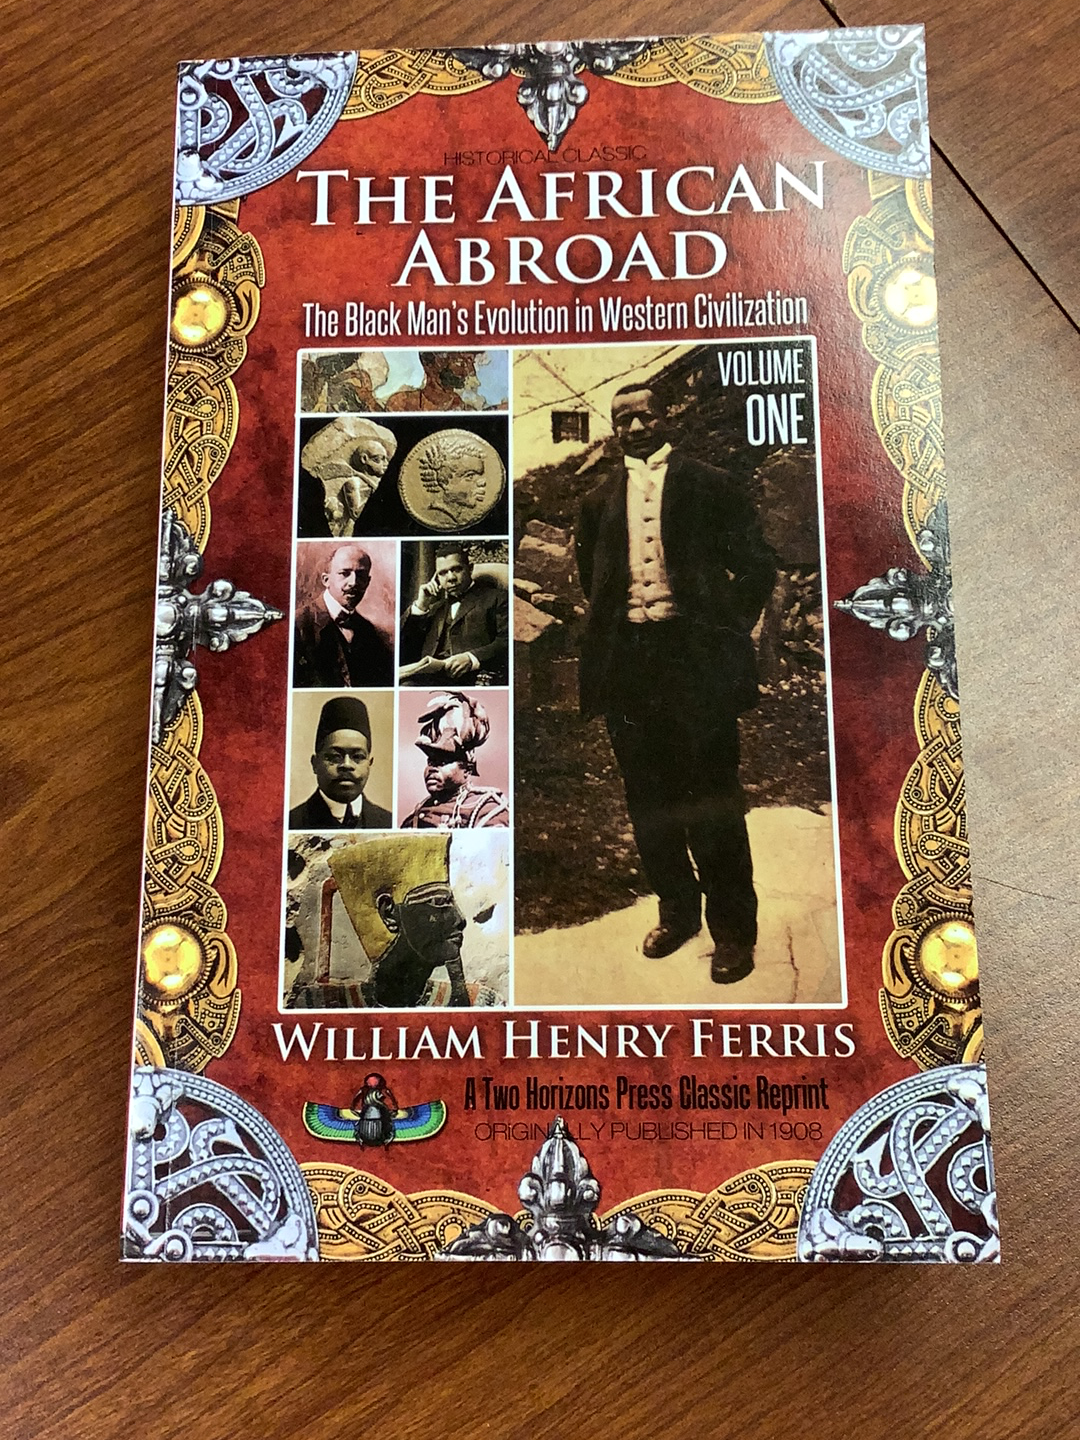 The African Abroad: The Black Man’s Evolution in Western Civilization Volume 1